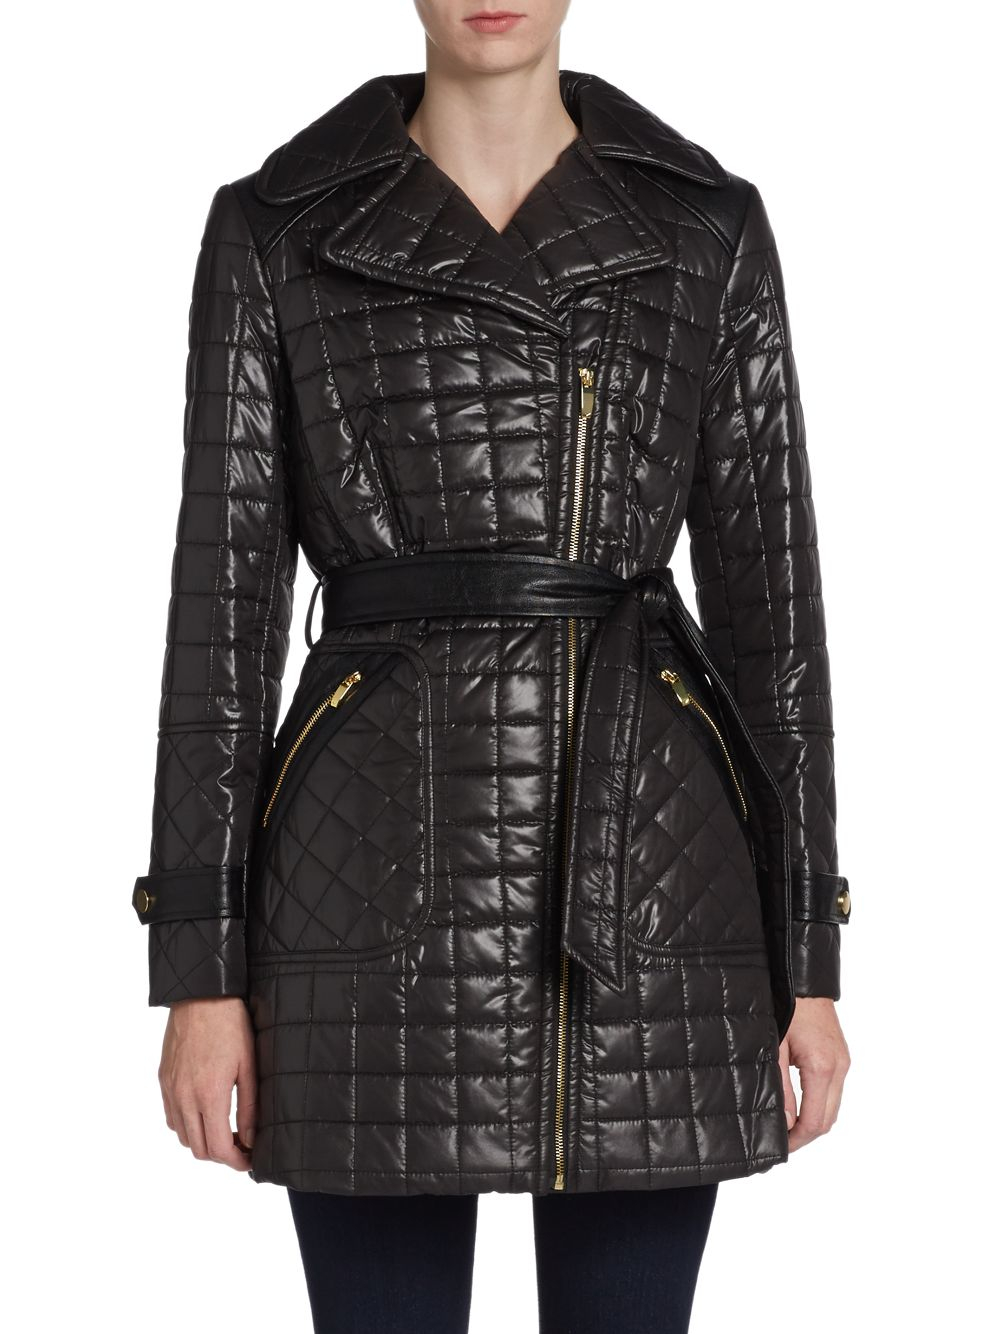 Lyst - Via spiga Belted Quilt Trench in Black